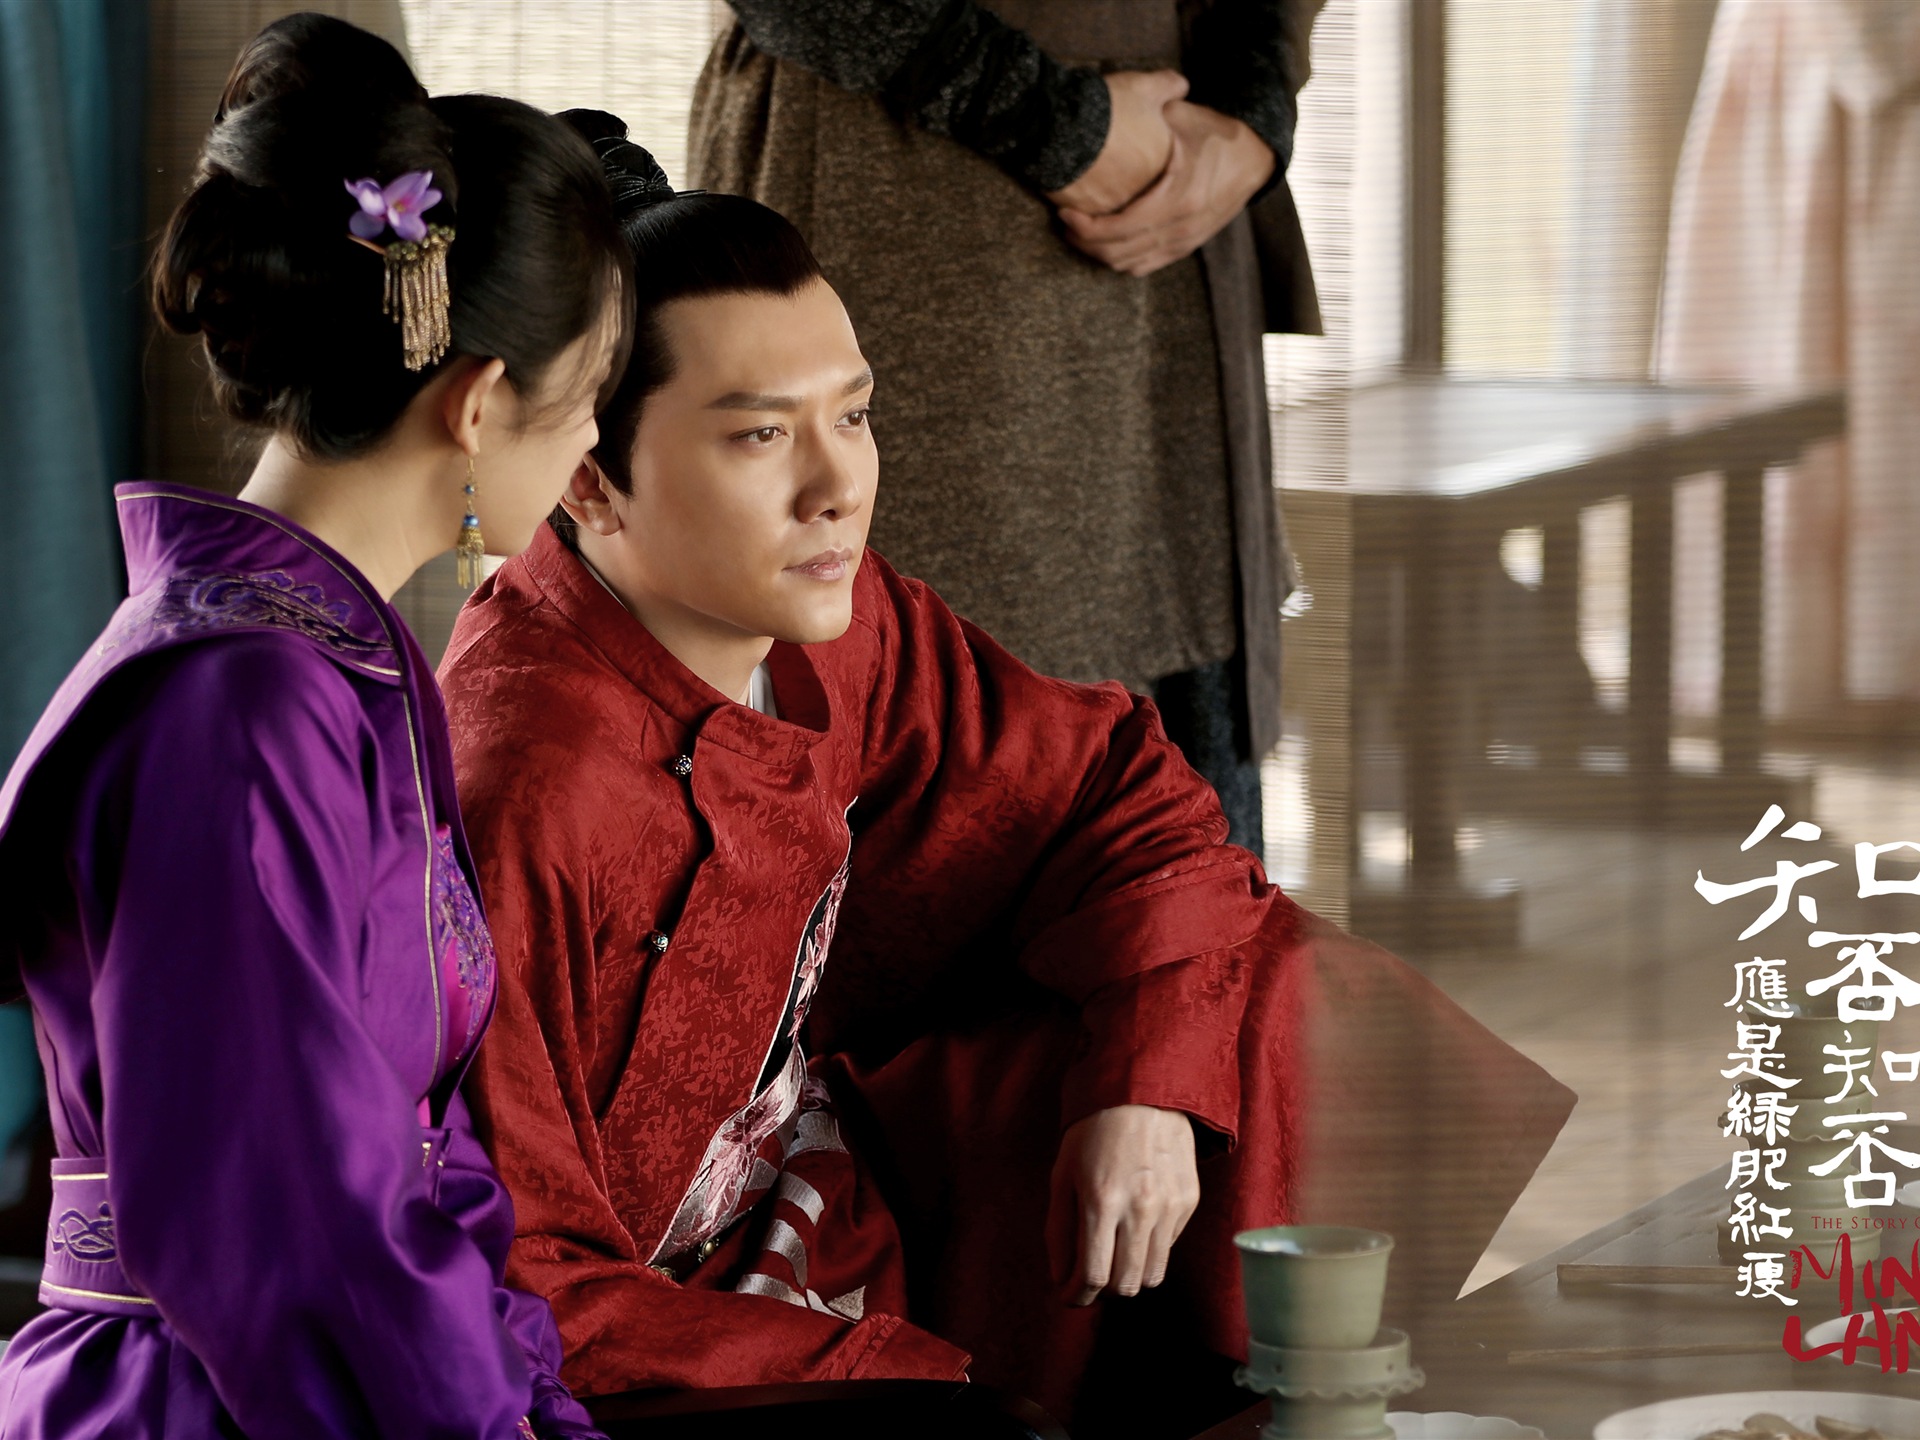 The Story Of MingLan, TV series HD wallpapers #42 - 1920x1440